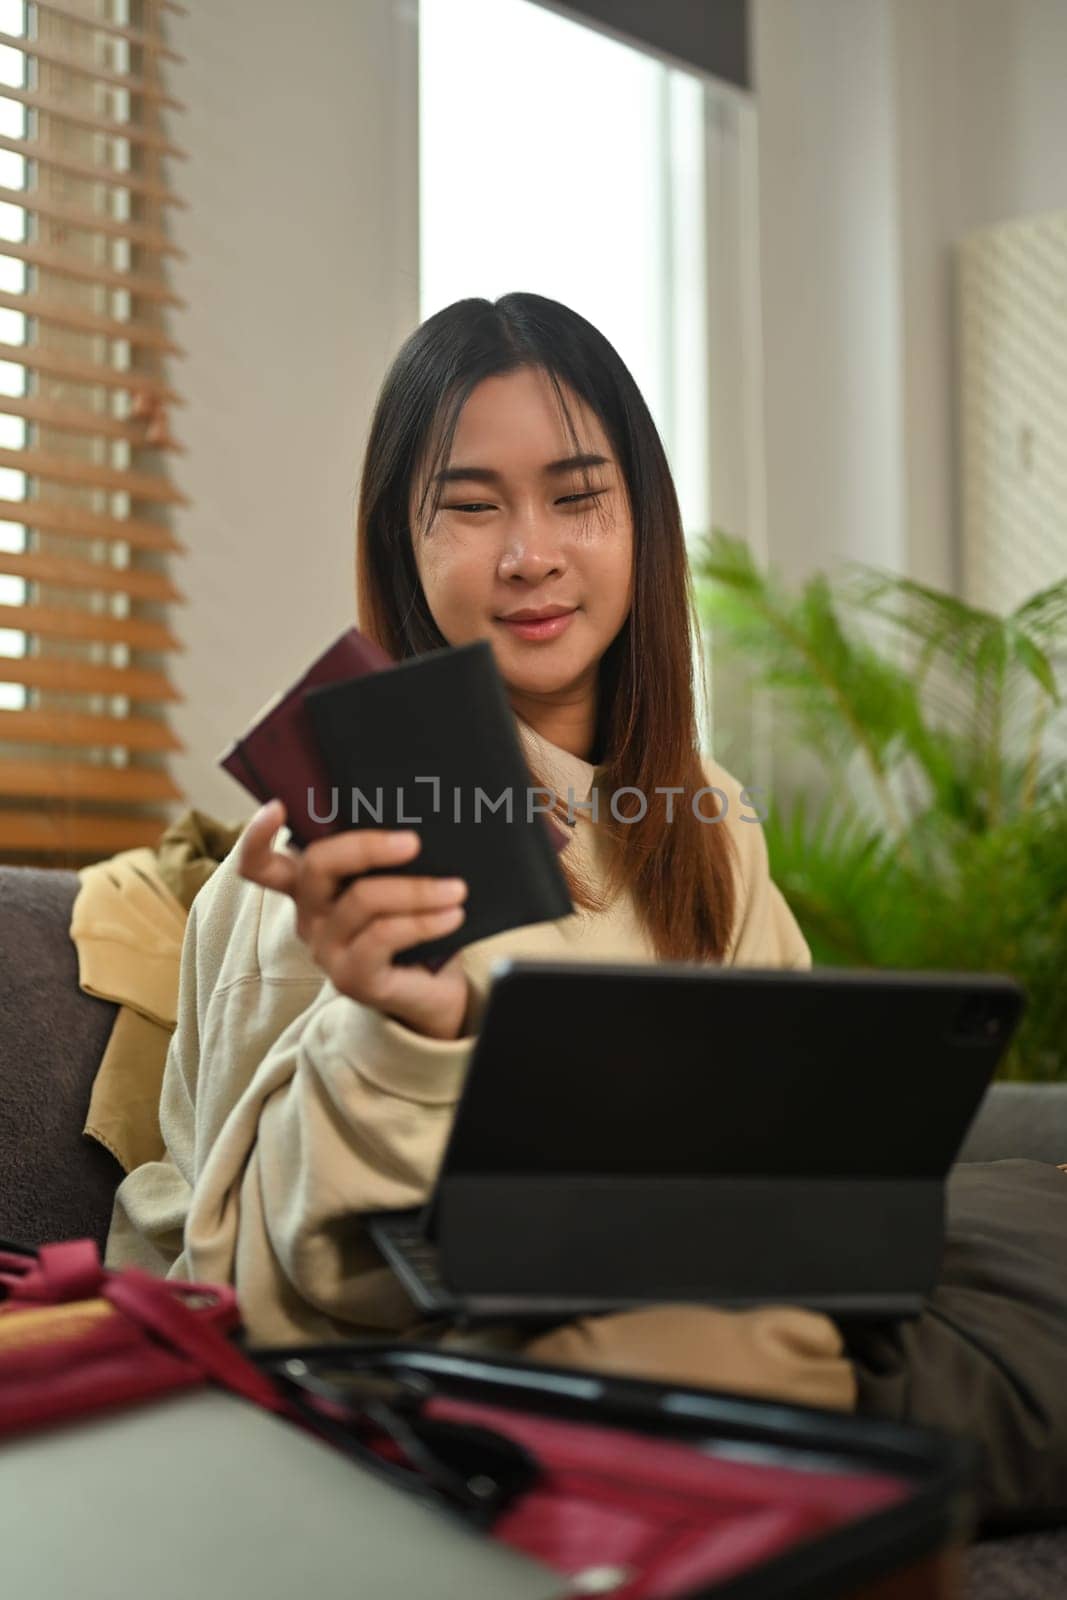 Pleasant young woman holding passport and booking flight tickets on digital tablet.